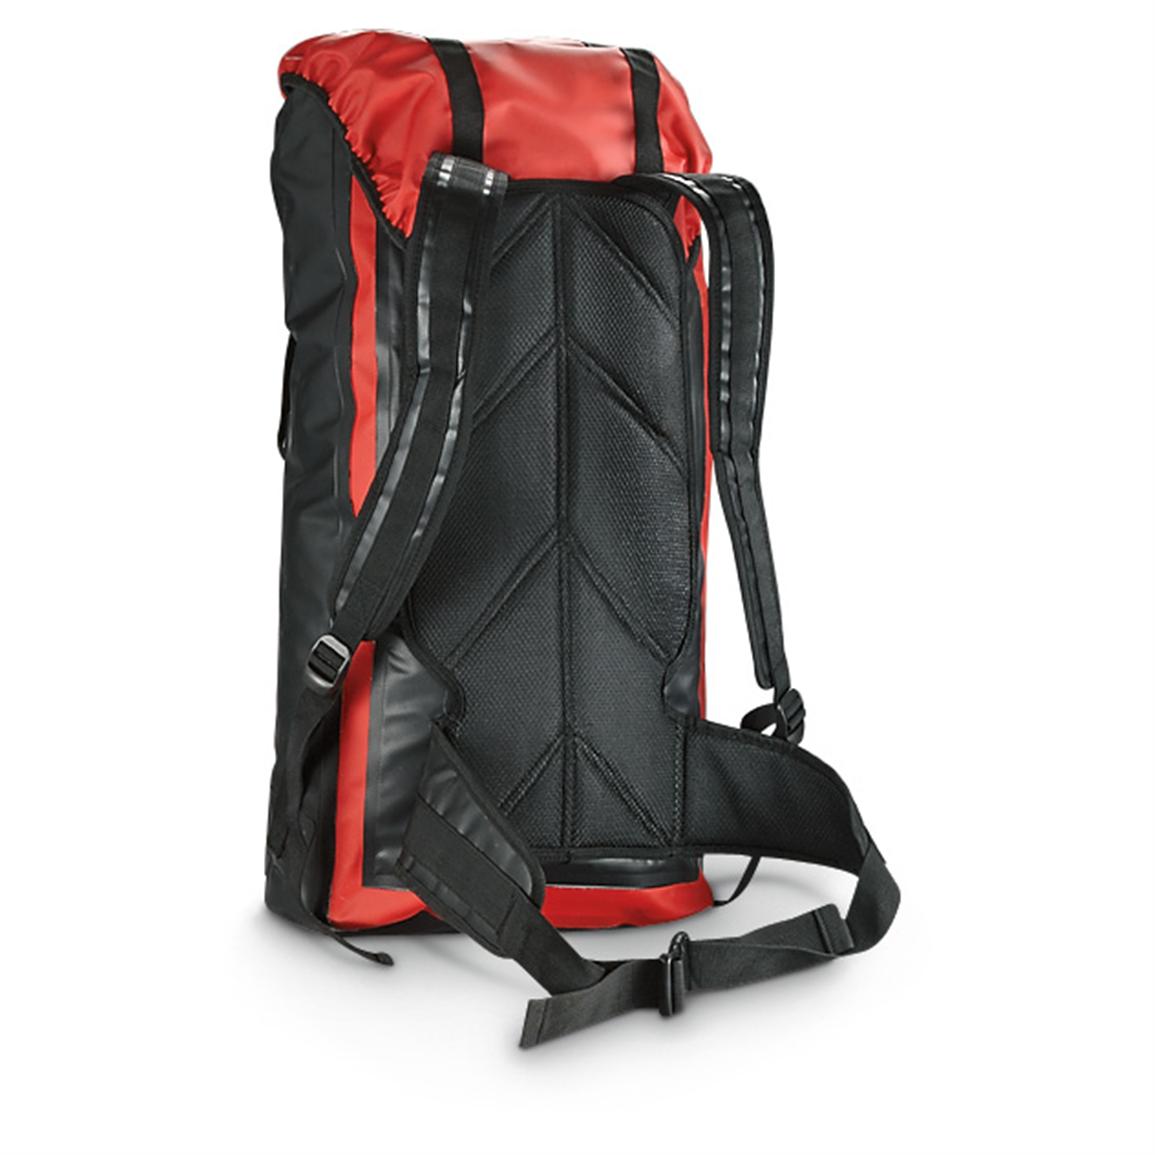 Guide Gear Dry Bag Backpack 60 Liter 581923 Gear And Duffel Bags At Sportsmans Guide 